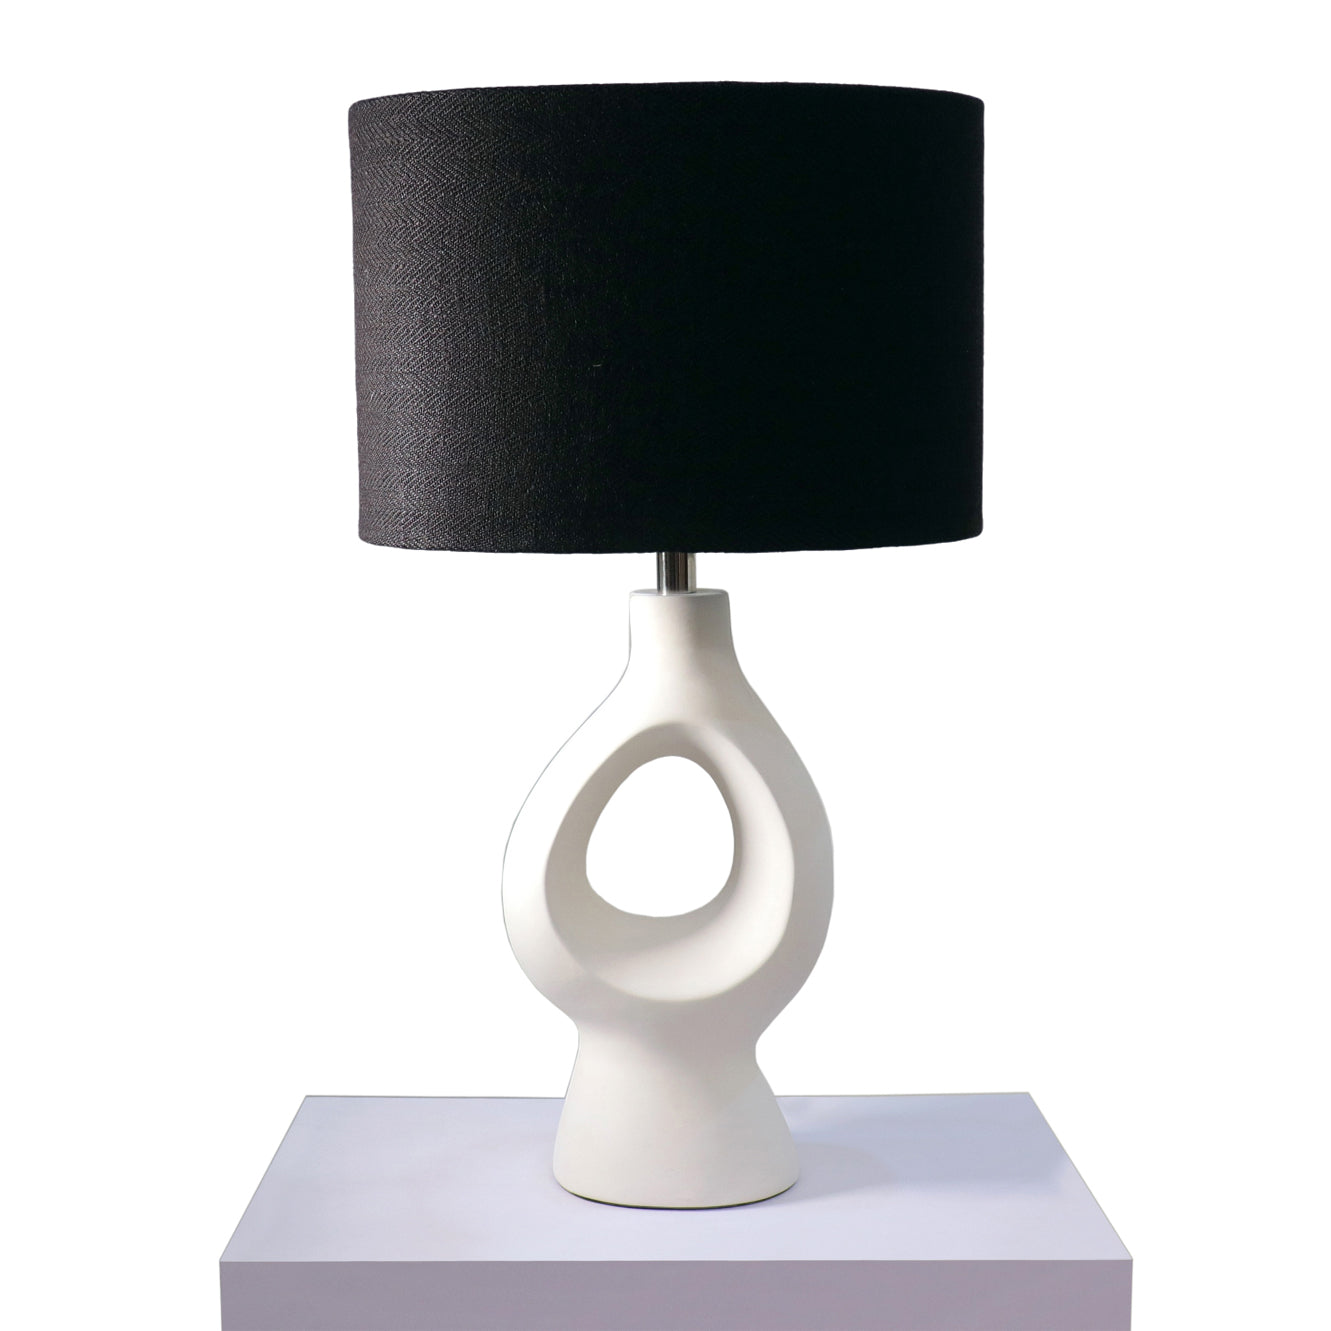 Void Cermamic Table Lamp